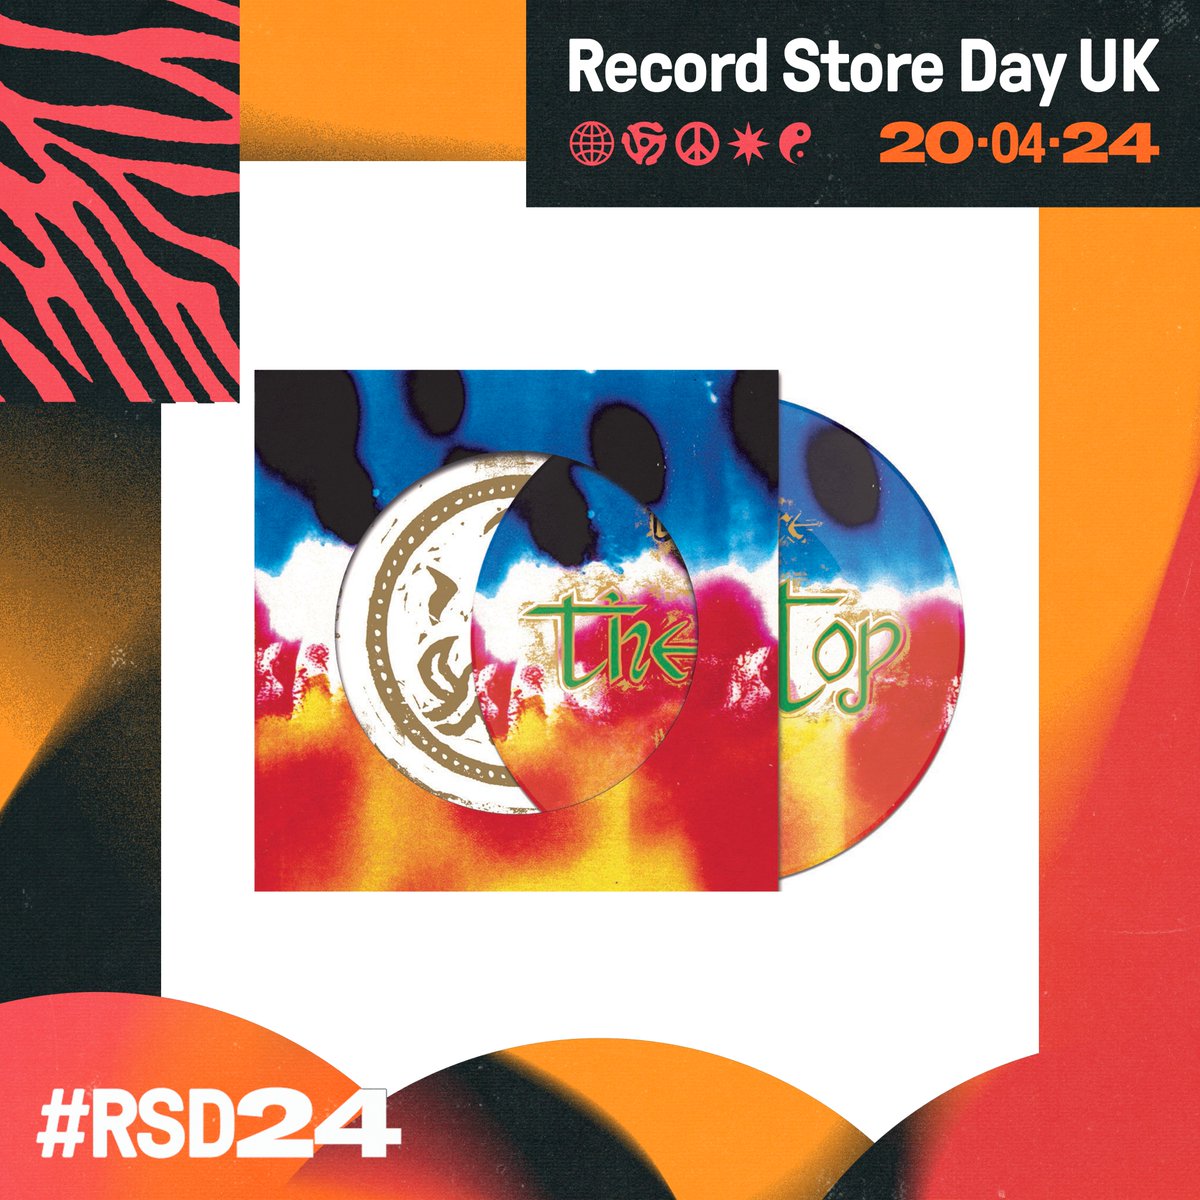 OUT 20TH APRIL FOR RECORD STORE DAY. THE 40TH ANNIVERSARY VERSION OF 'THE TOP', REMASTERED BY ROBERT SMITH AND AVAILABLE ON PICTURE DISC FOR THE FIRST TIME. RELEASED IN PARTNERSHIP WITH THE WARCHILD INITIATIVE. SEE ALL THE RELEASES AT recordstoreday.lnk.to/RSD24-GLB #RSD24